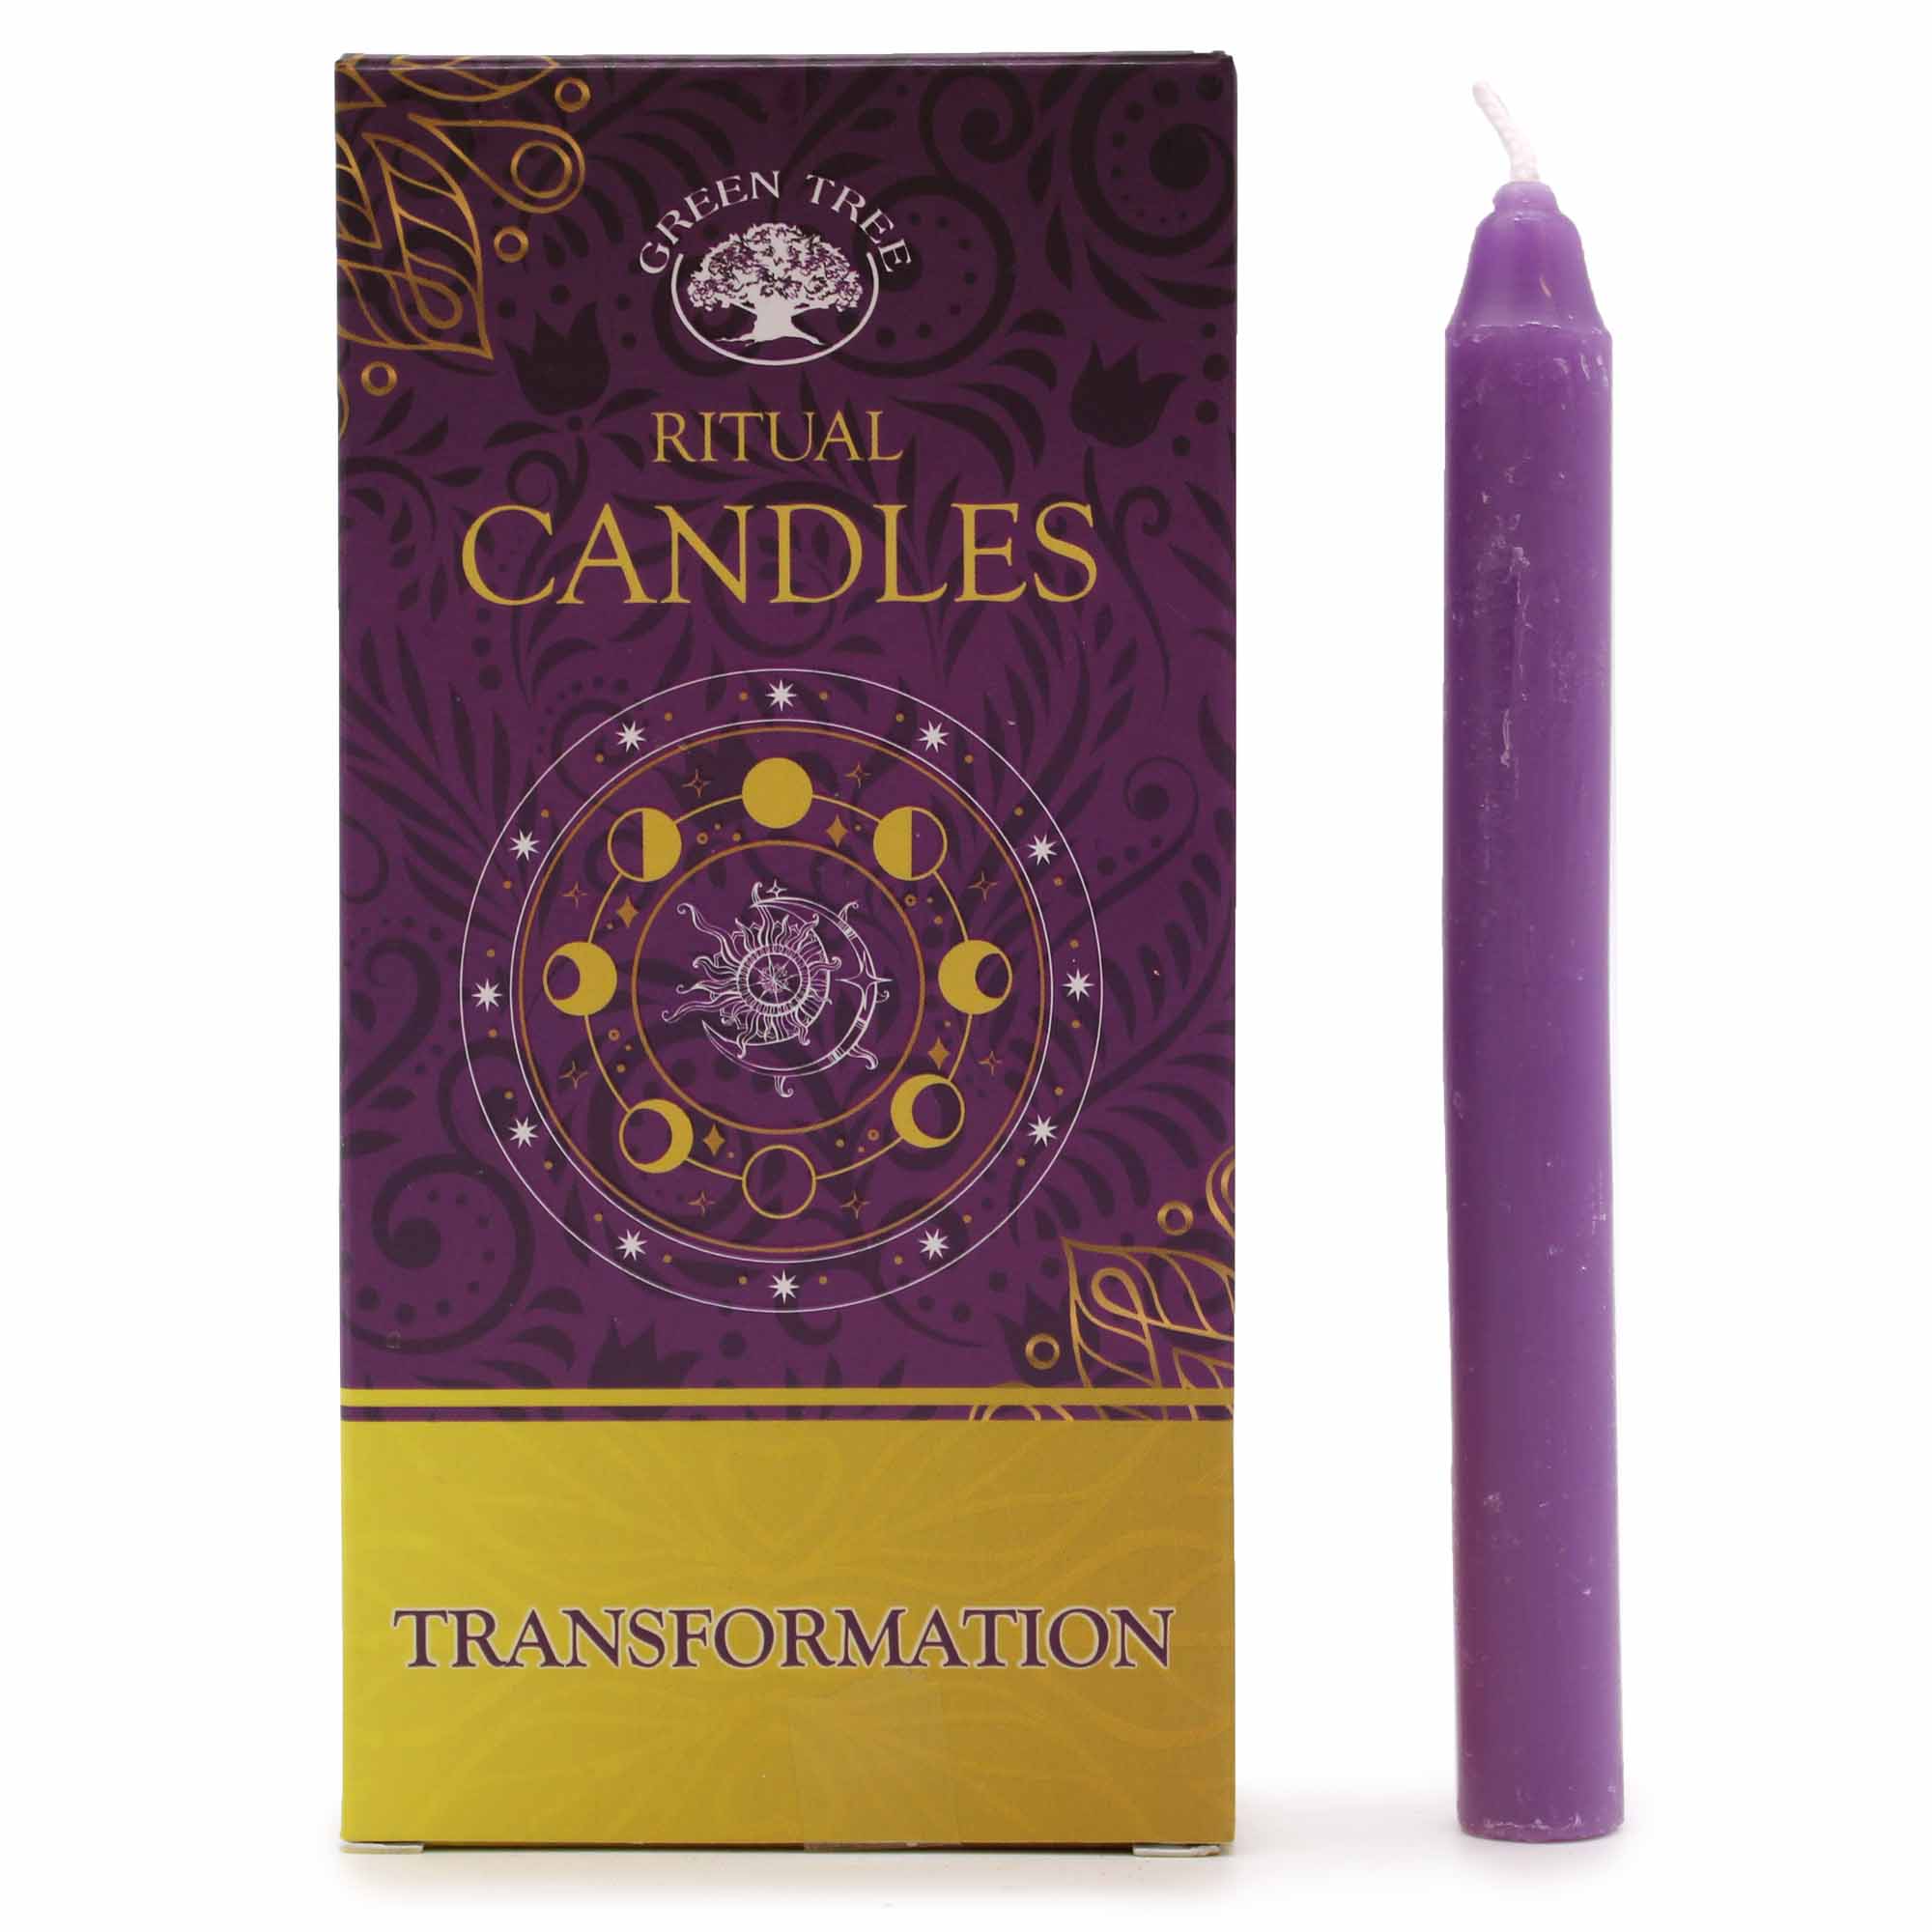 View Set of 10 Spell Candles Transformation information